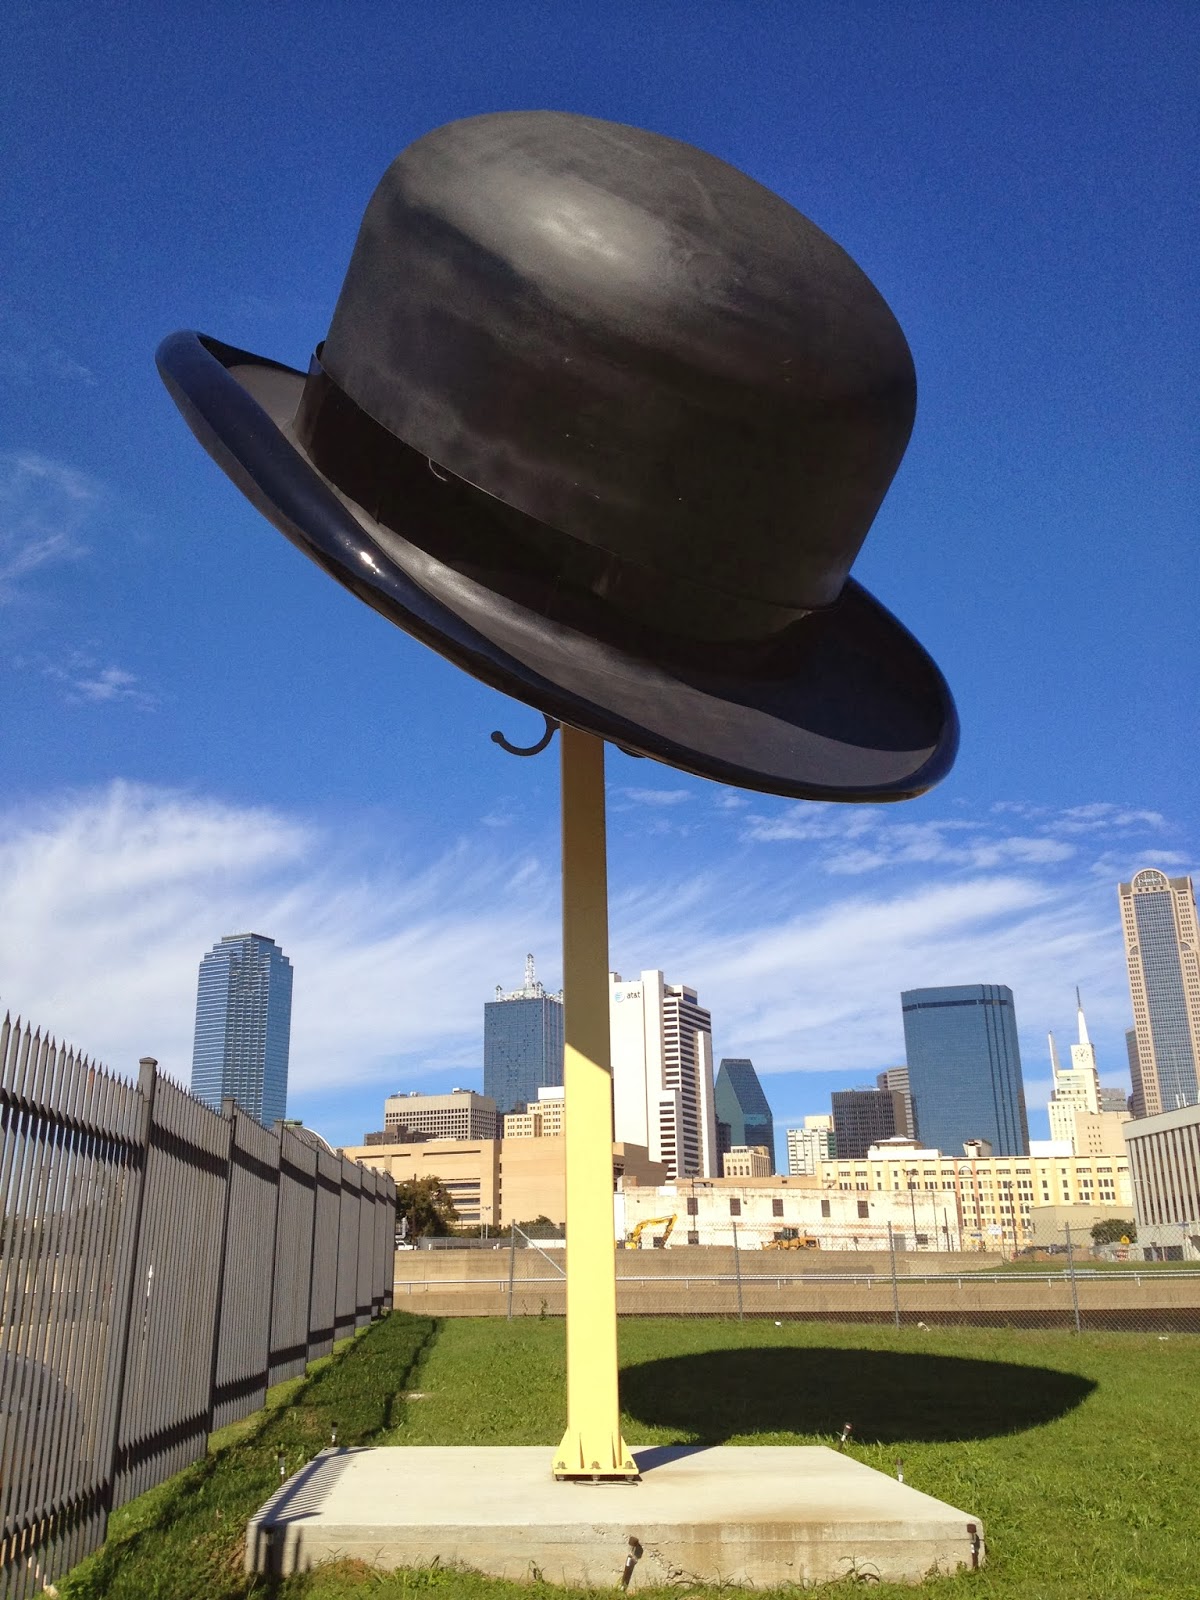 Metroplexing: What's the Story Behind this Giant Hat?